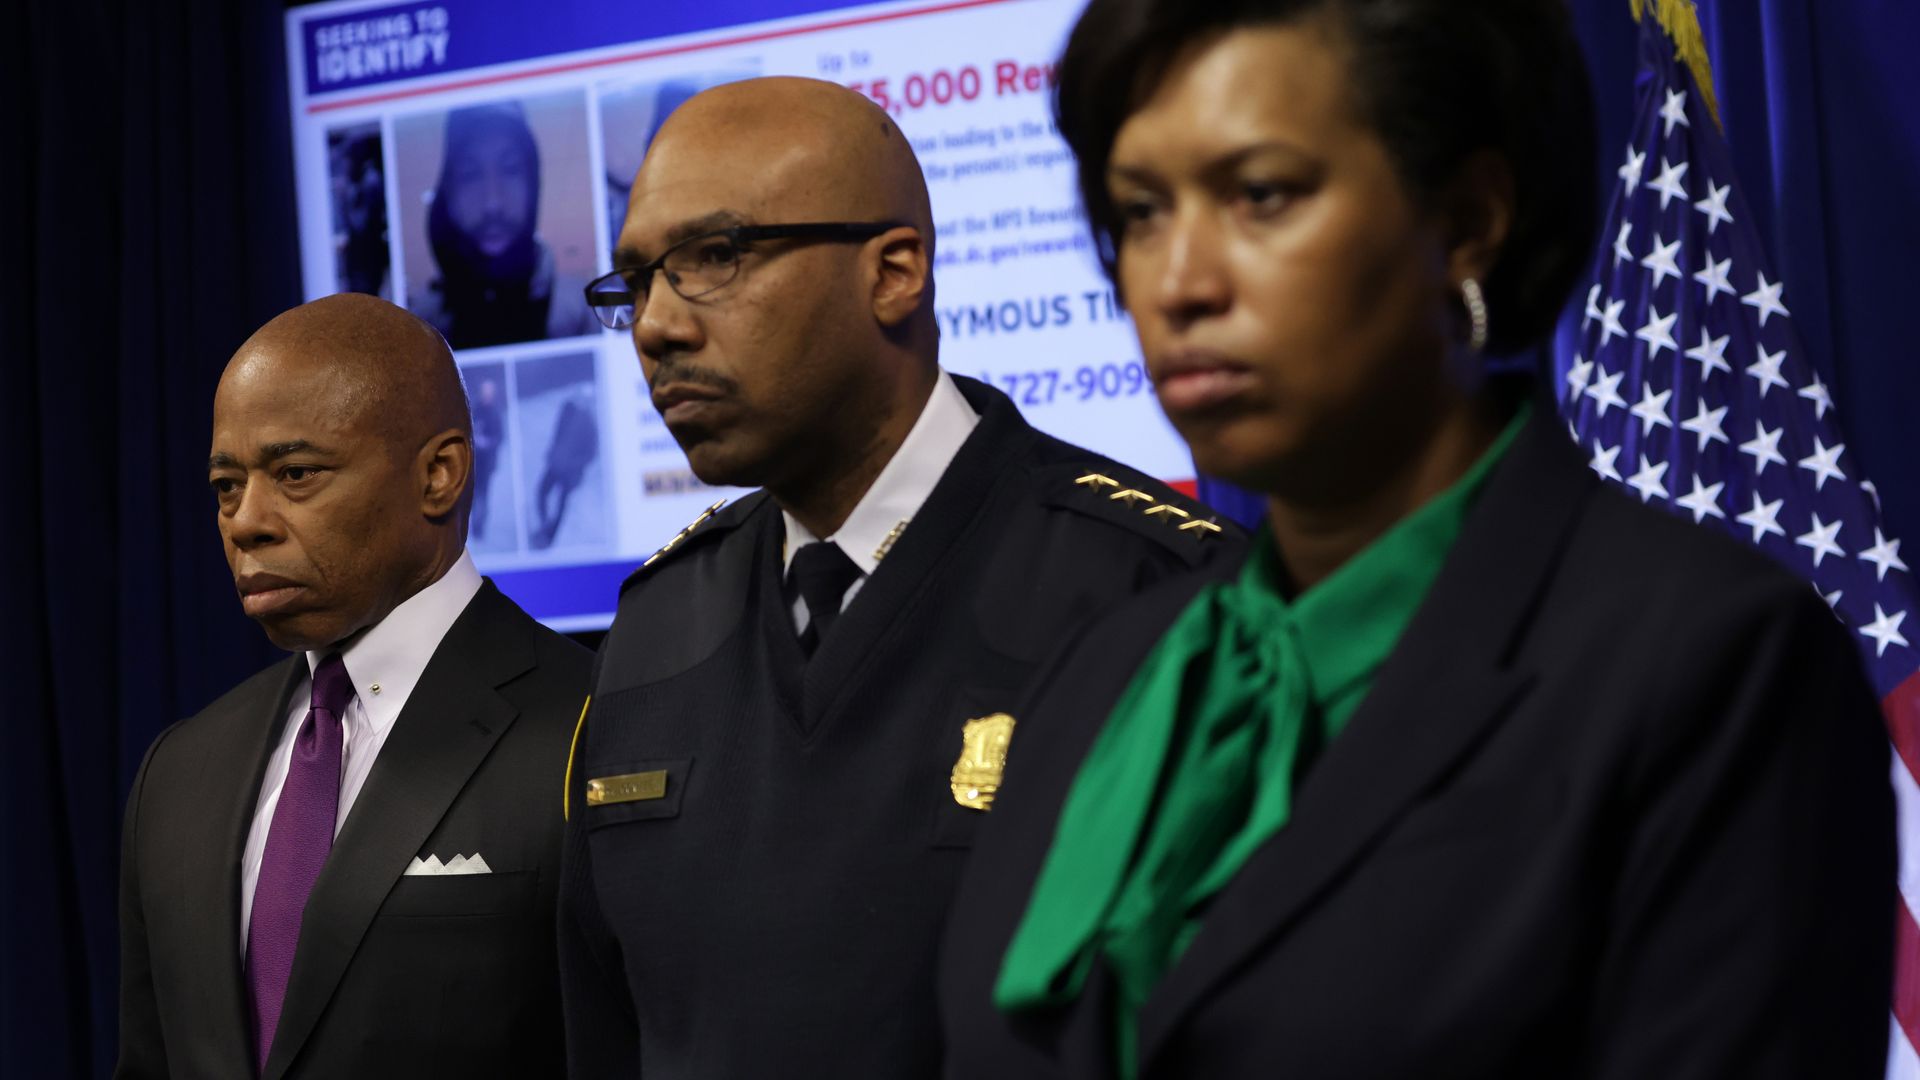 From left to right, New York City Mayor Eric Adams, D.C. police chief Robert Contee, and D.C. Mayor Muriel Bowser